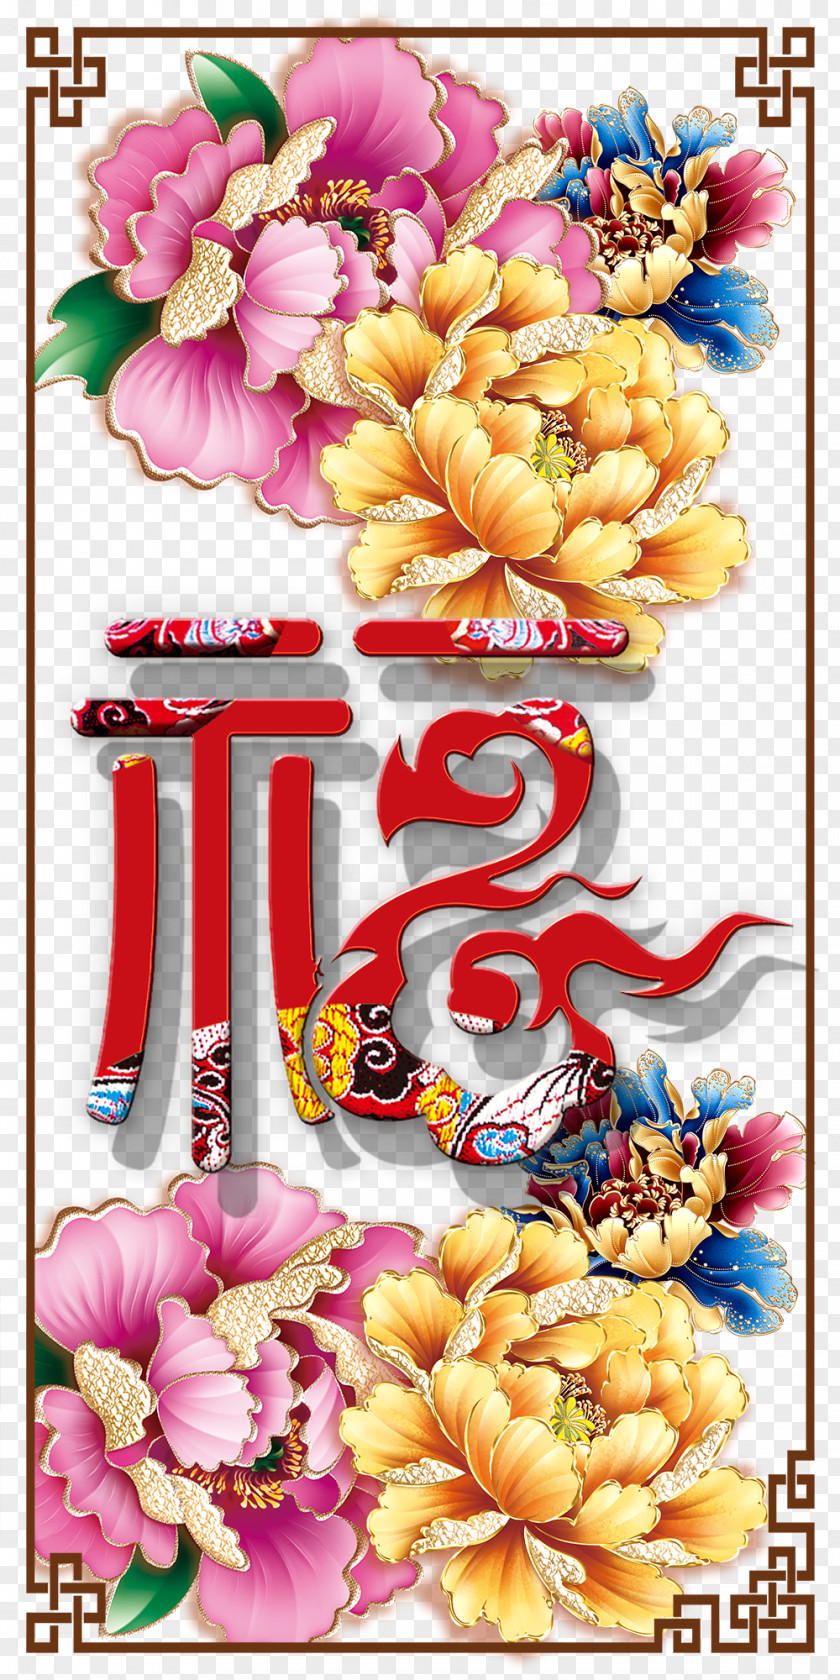 Family Harmony Floral Design Poster PNG